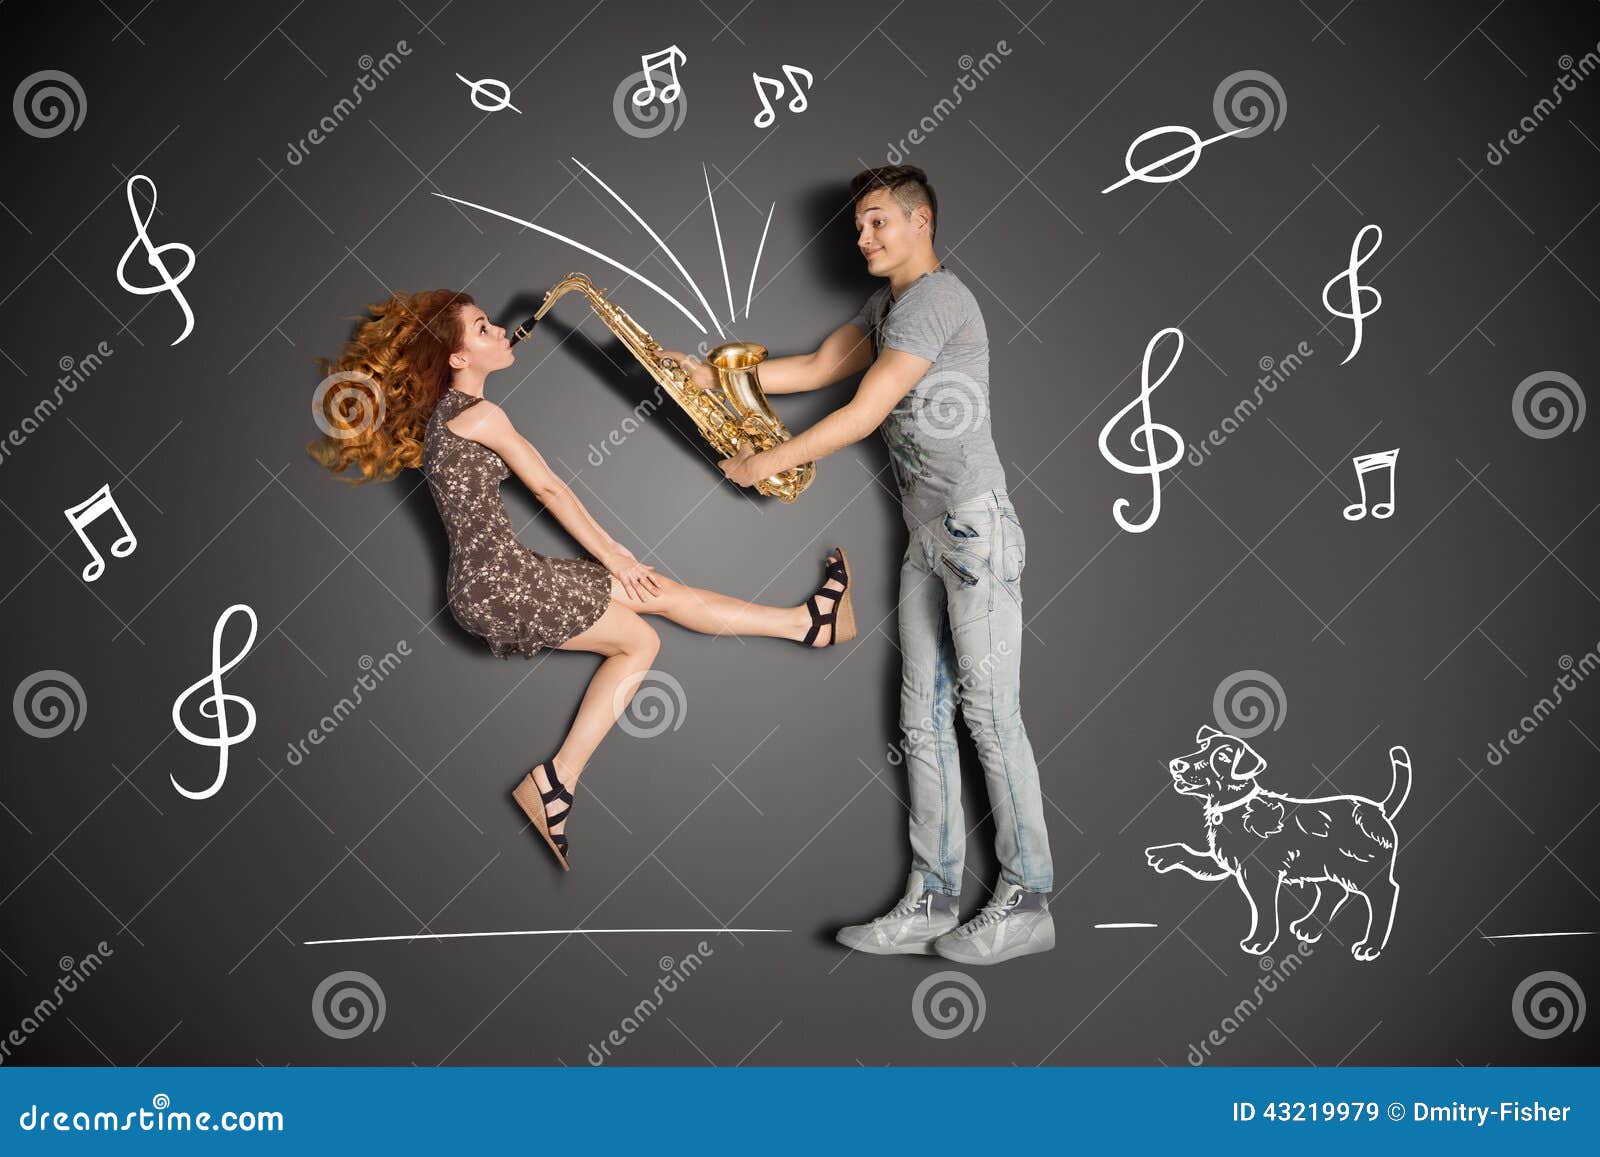 Love Story Concept Of A Romantic Couple Against Chalk Drawings Heaven  Background. Male Playing The Sax For His Girlfriend. Stock Photo, Picture  and Royalty Free Image. Image 41249264.